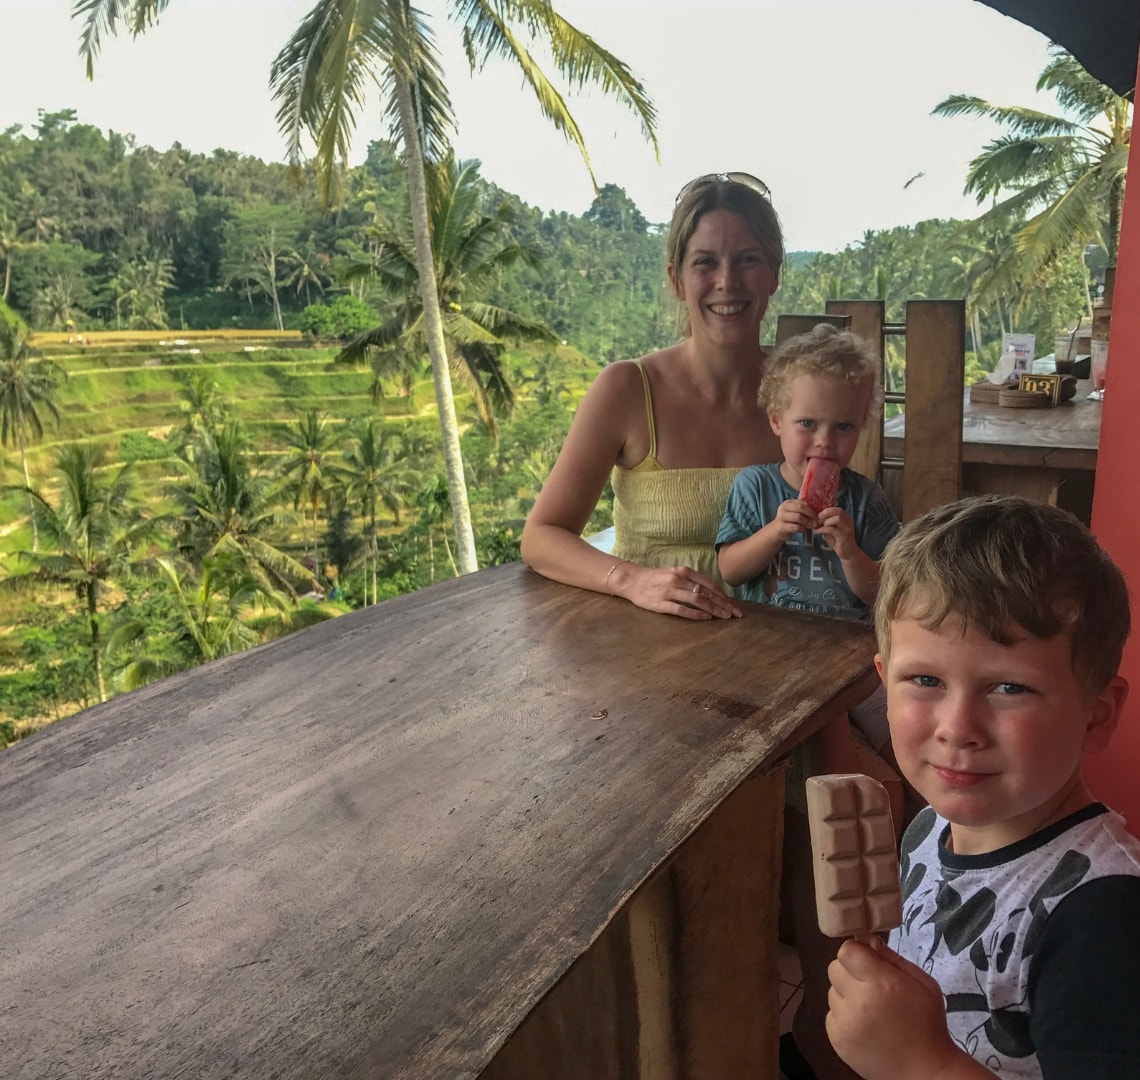 The Small Print - me and the Things having ice cream - Ubud rice terraces